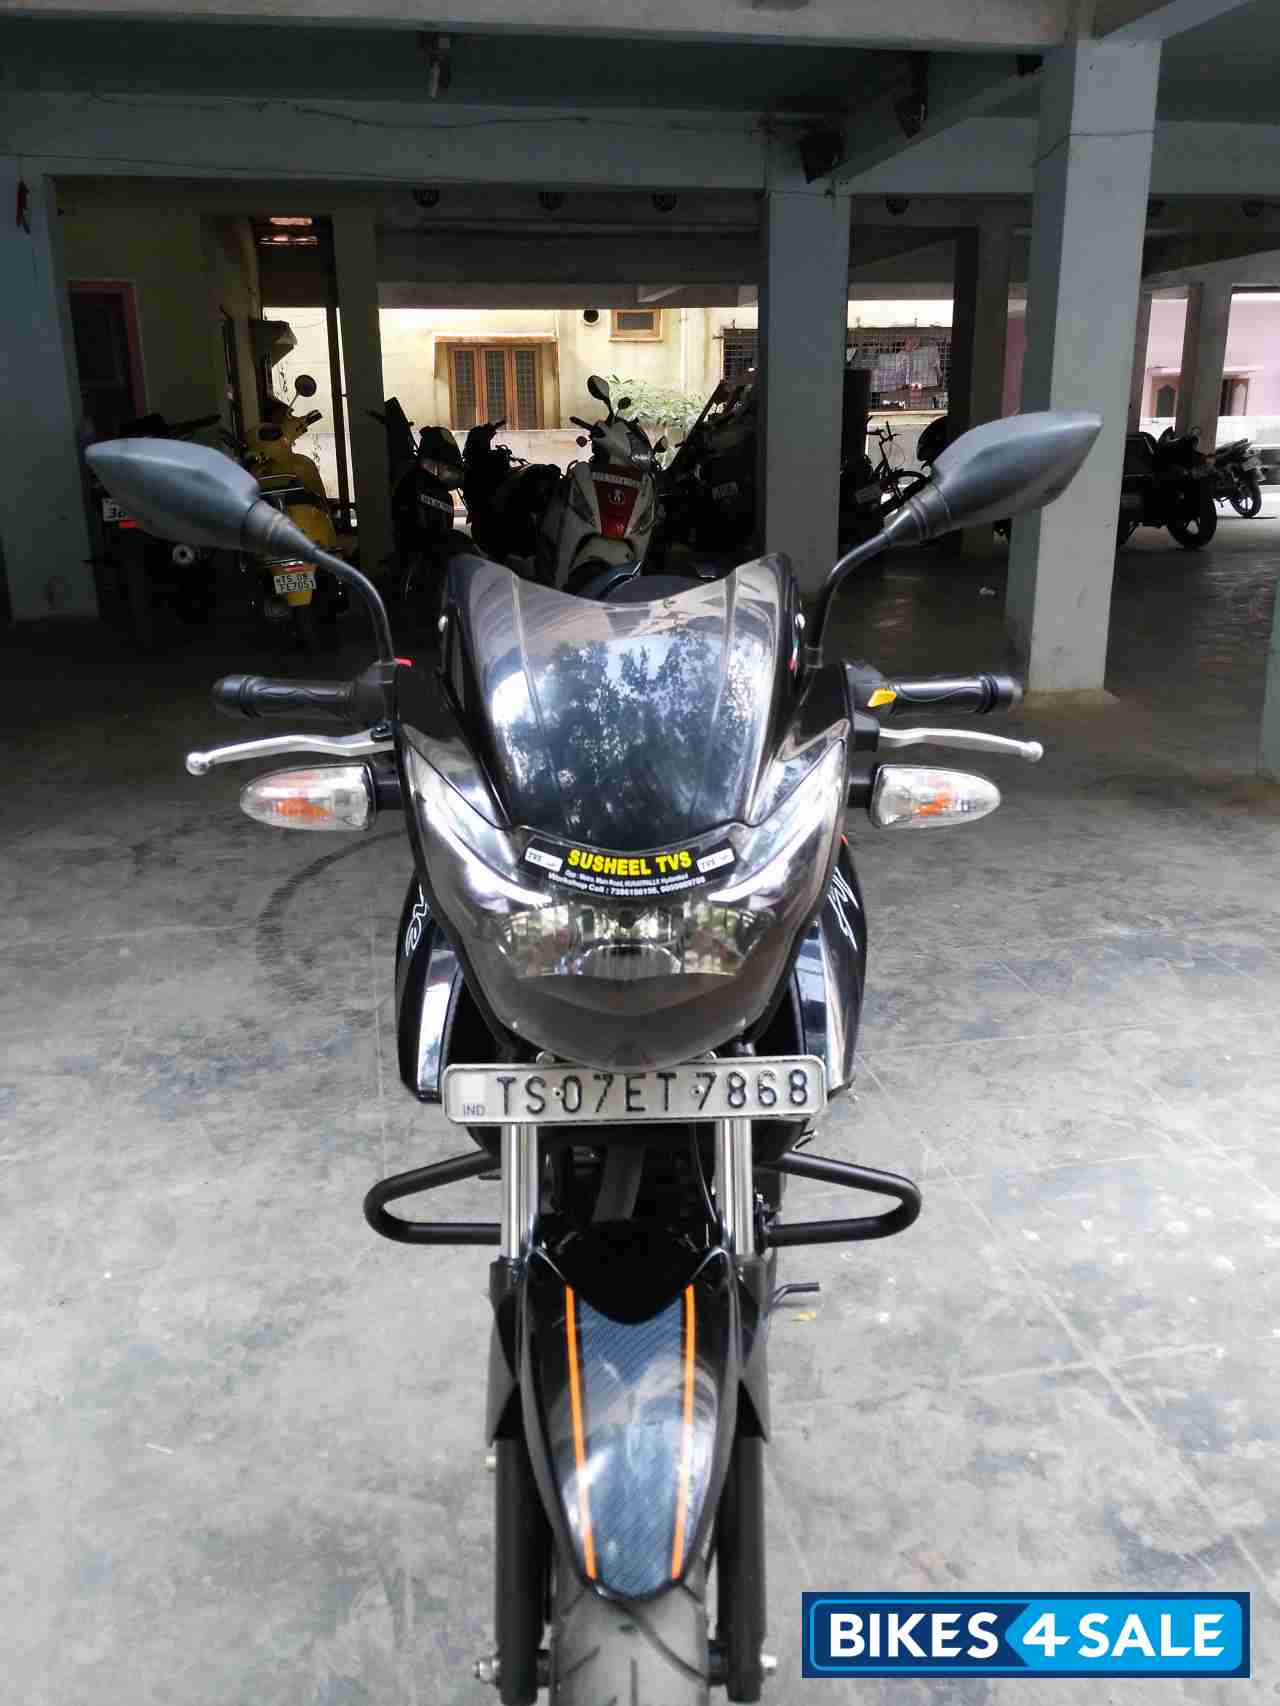 Used 16 Model Tvs Apache Rtr 160 For Sale In Hyderabad Id 1459 Black Colour Bikes4sale